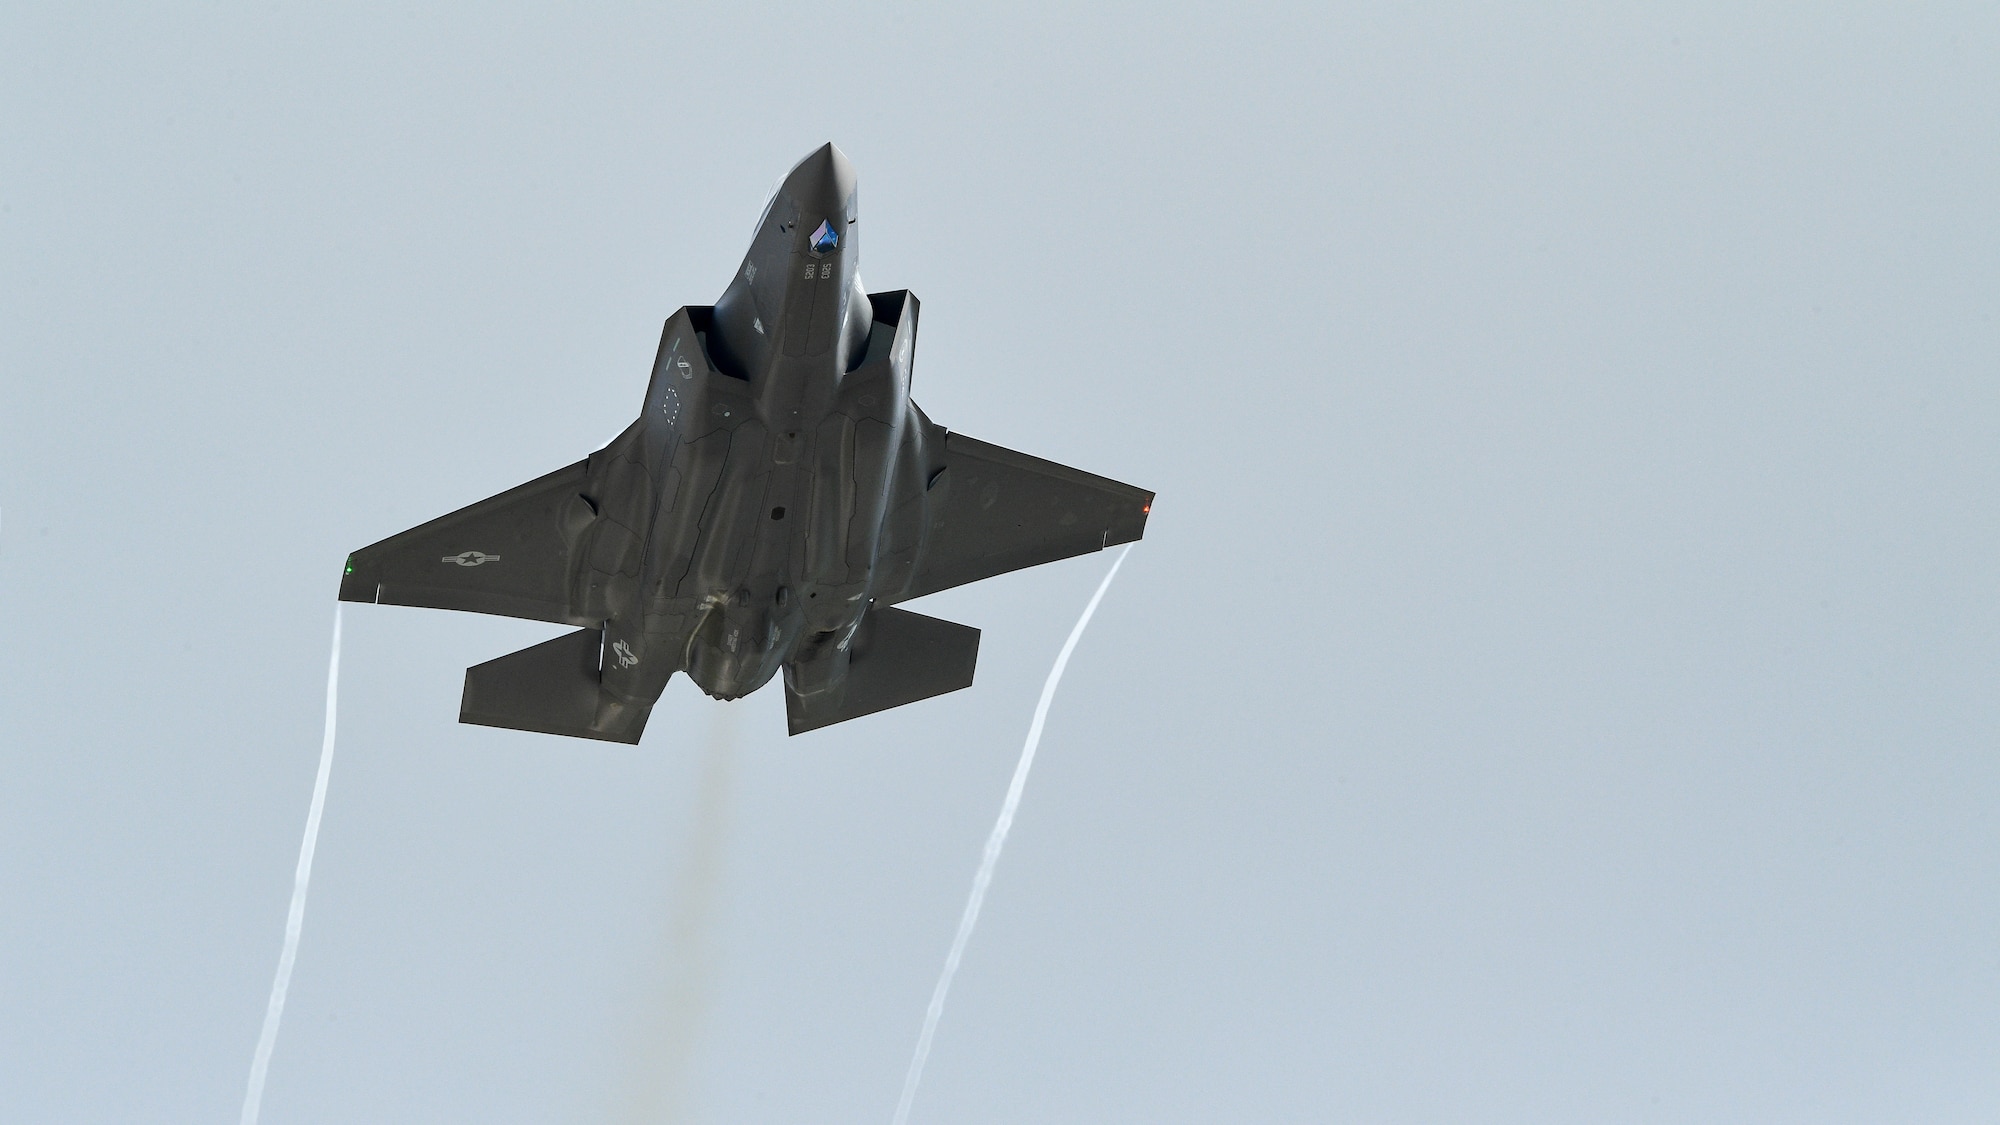 An F-35A takes off during a combat exercise at Hill Air Force Base, Utah, May 1, 2019. The active duty 388th Fighter Wing and Reserve 419th Fighter Wing, along with F-16 units from Holloman AFB, New Mexico, and Kunsan Air Base, Korea, conducted an integrated combat exercise where maintainers were tasked to continually provide ready aircraft and pilots took off in waves to simulate a large force engagement with enemy aircraft. (U.S. Air Force photo by R. Nial Bradshaw